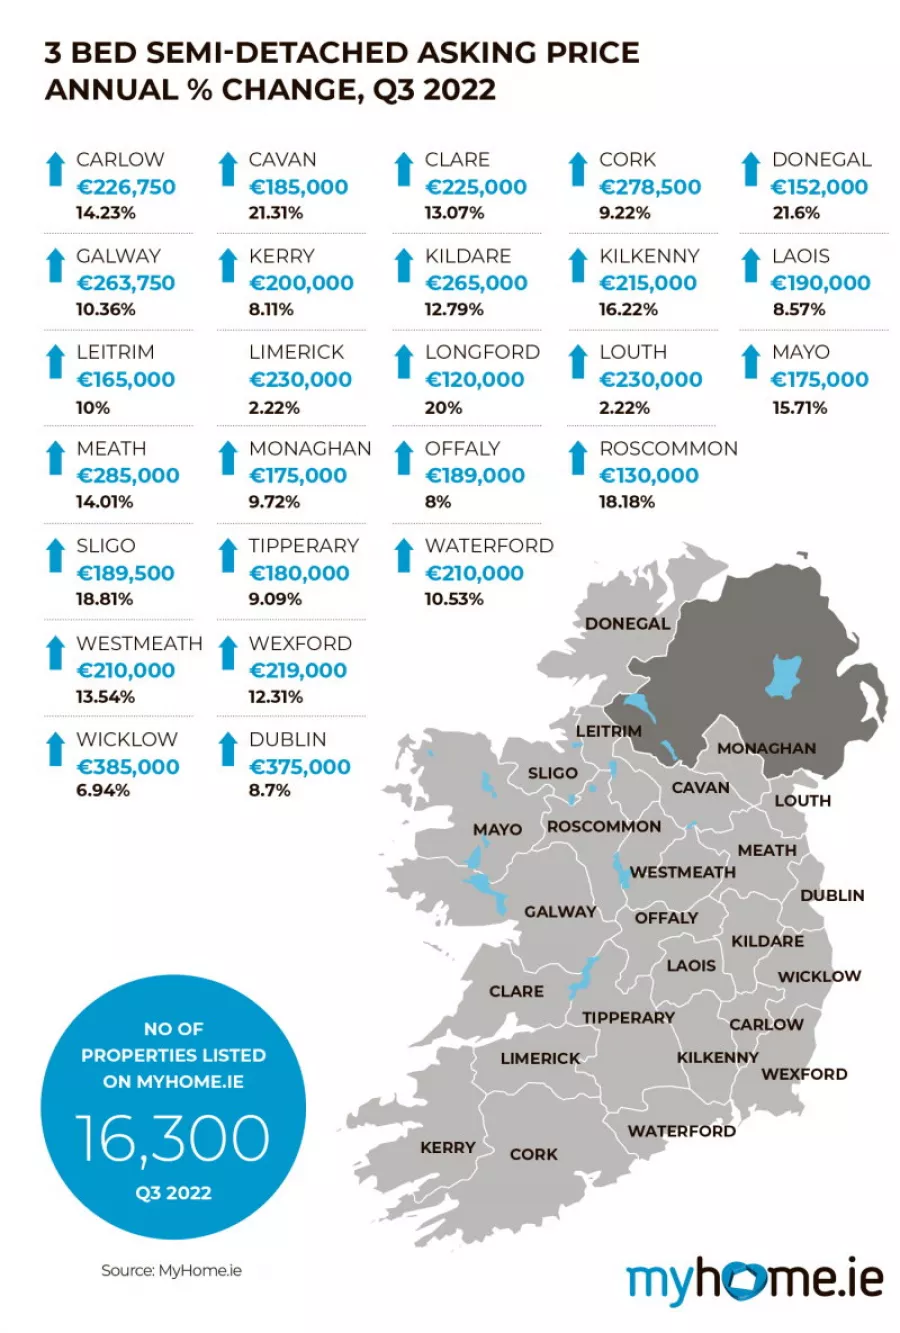 MyHome.ie Q3 2022 Property Report in association with Davy